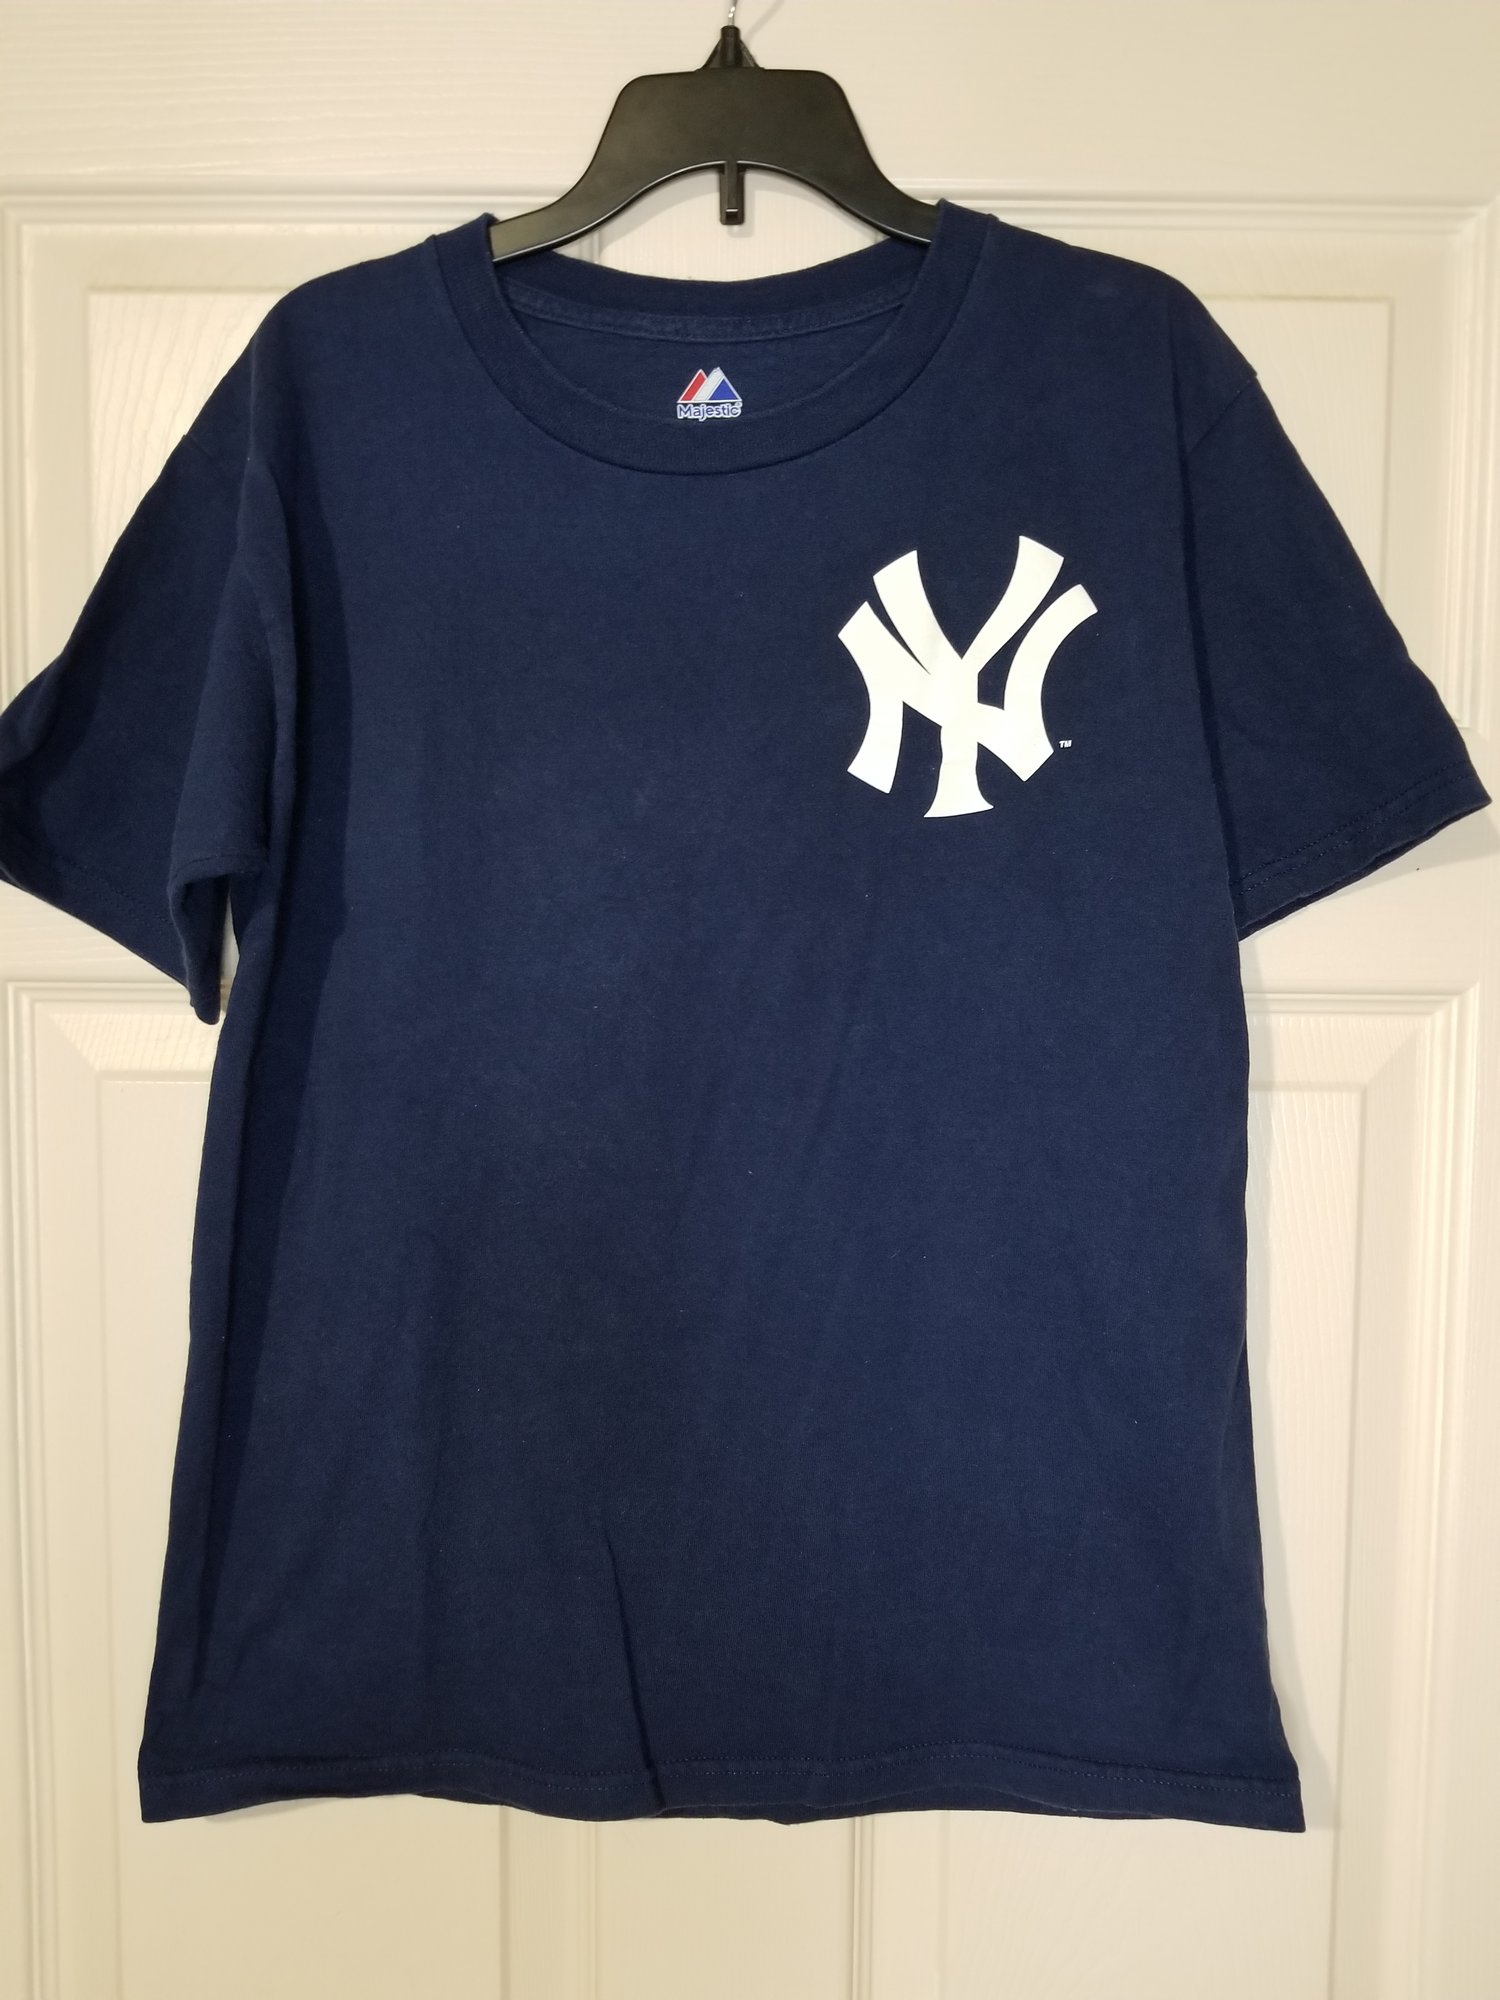 Majestic NY Derek Jeter Tee size Large(Small)